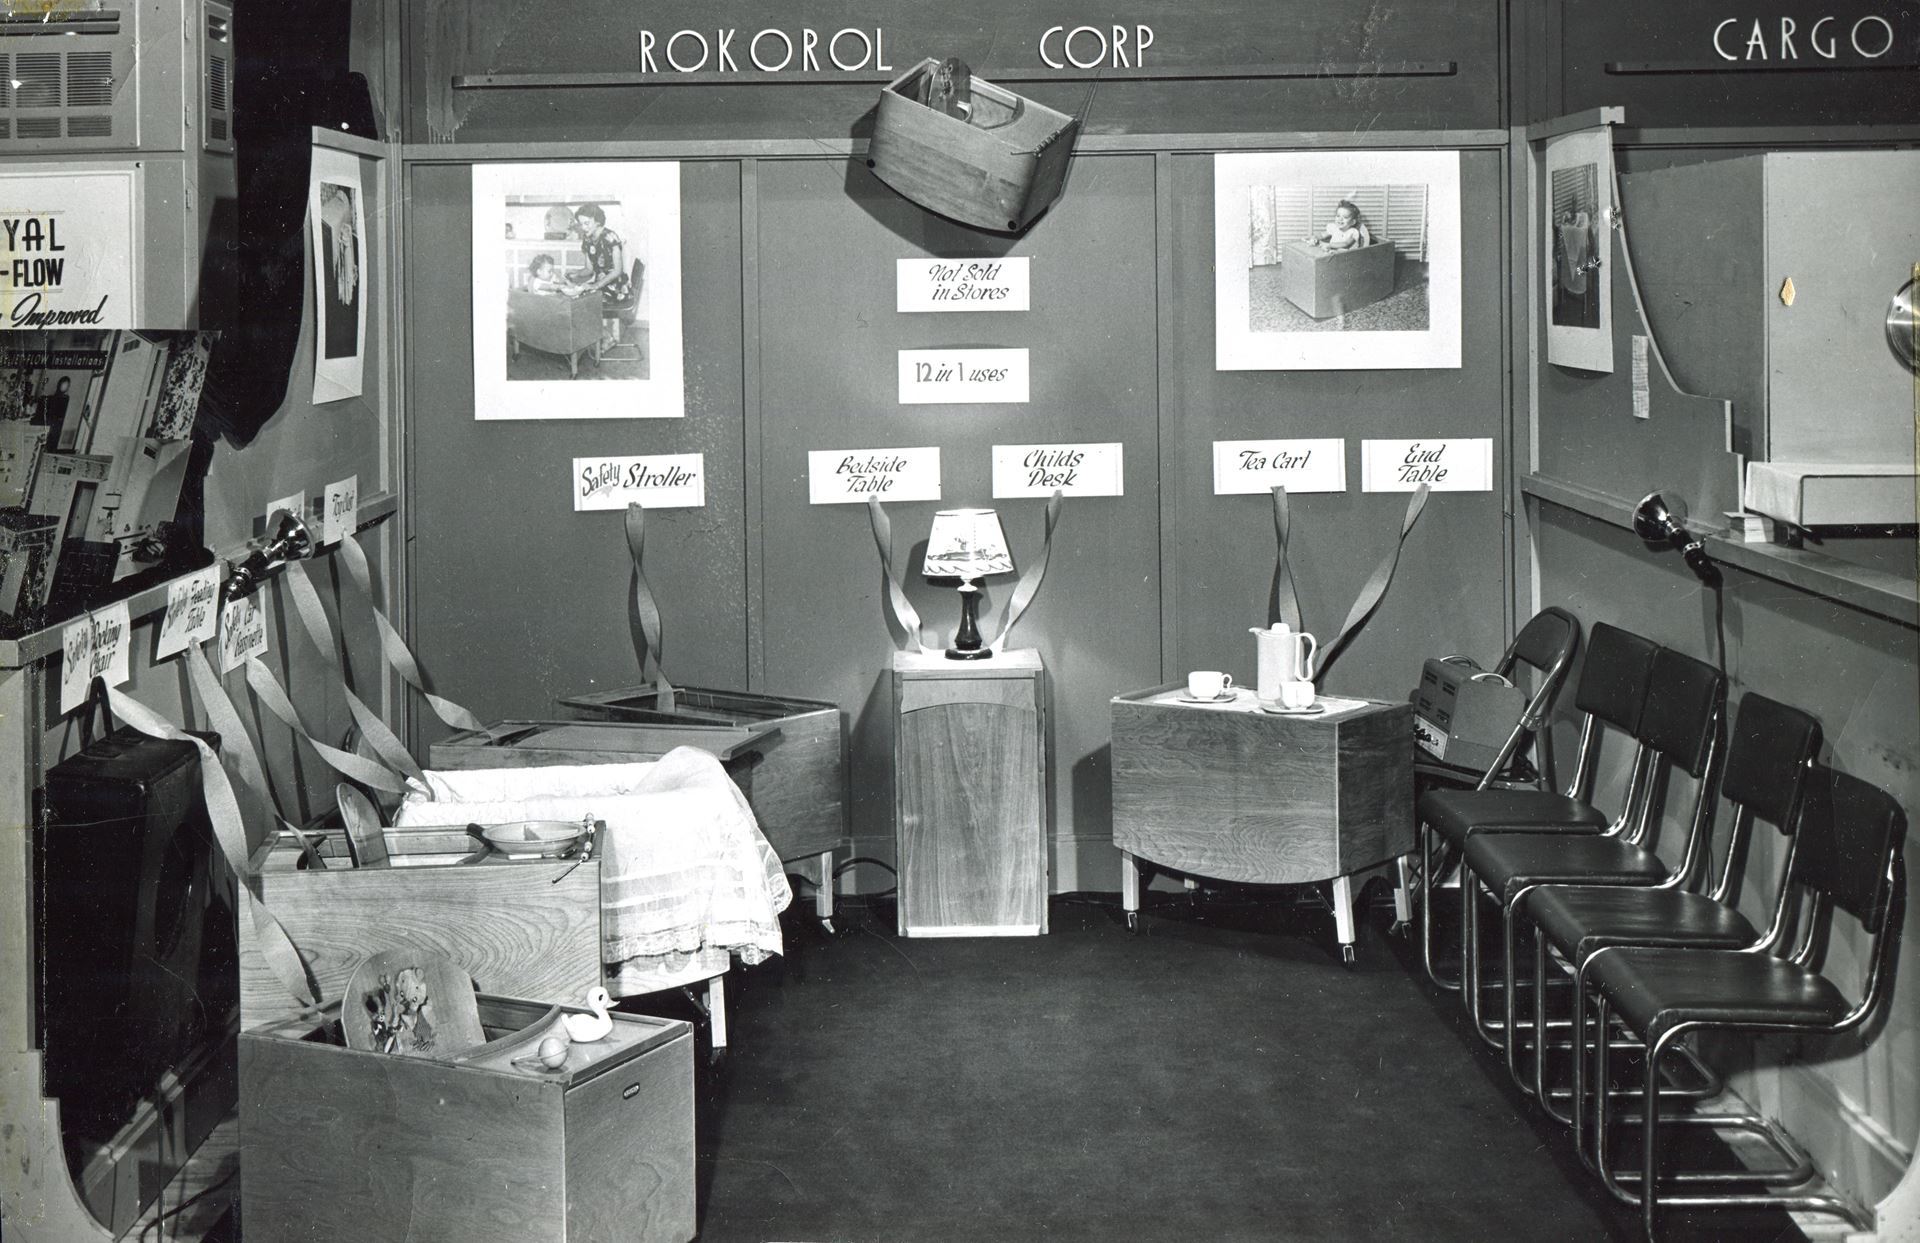 Rokorol Corp Display at the Los Angeles County Fair, Pomona, California, September 1948. Actress Joan was the model in the product photographs on display. Roy Brown Collection, Daly House Museum 